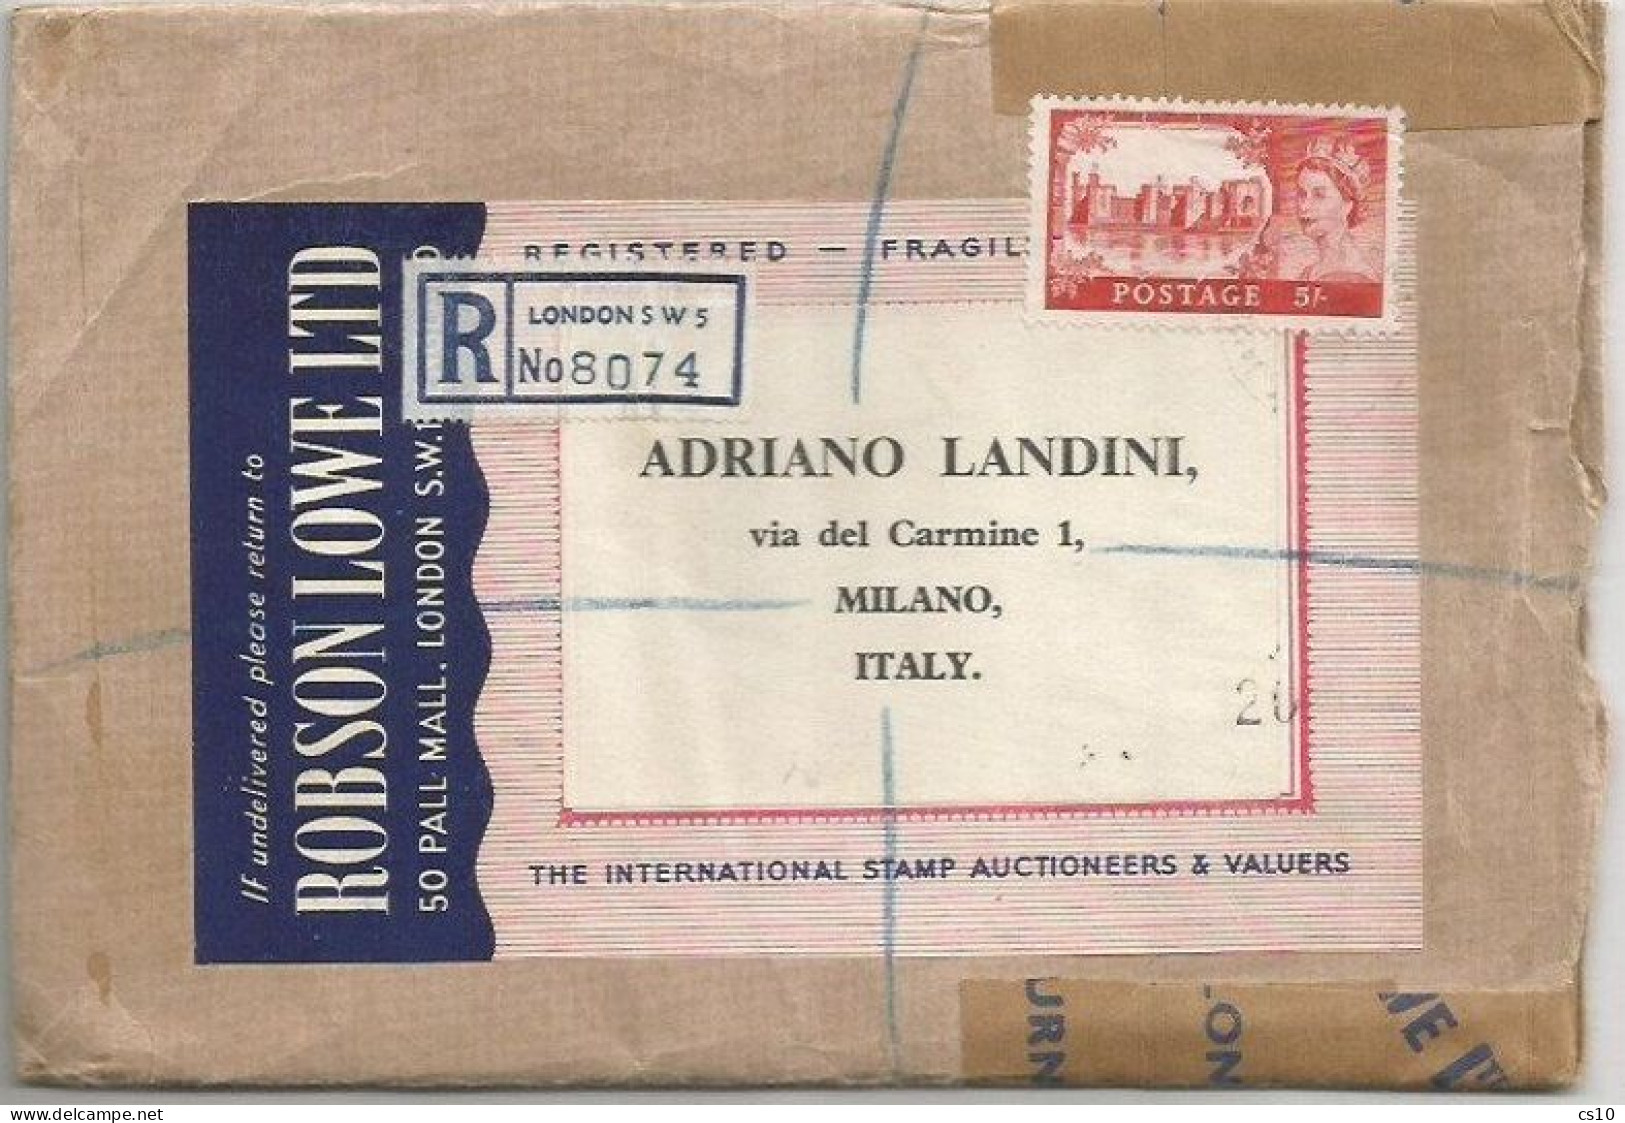 UK Britain Castles QE2 S5 Solo Franking Reg.CV London 3march 1967 To Italy - Postmark Collection